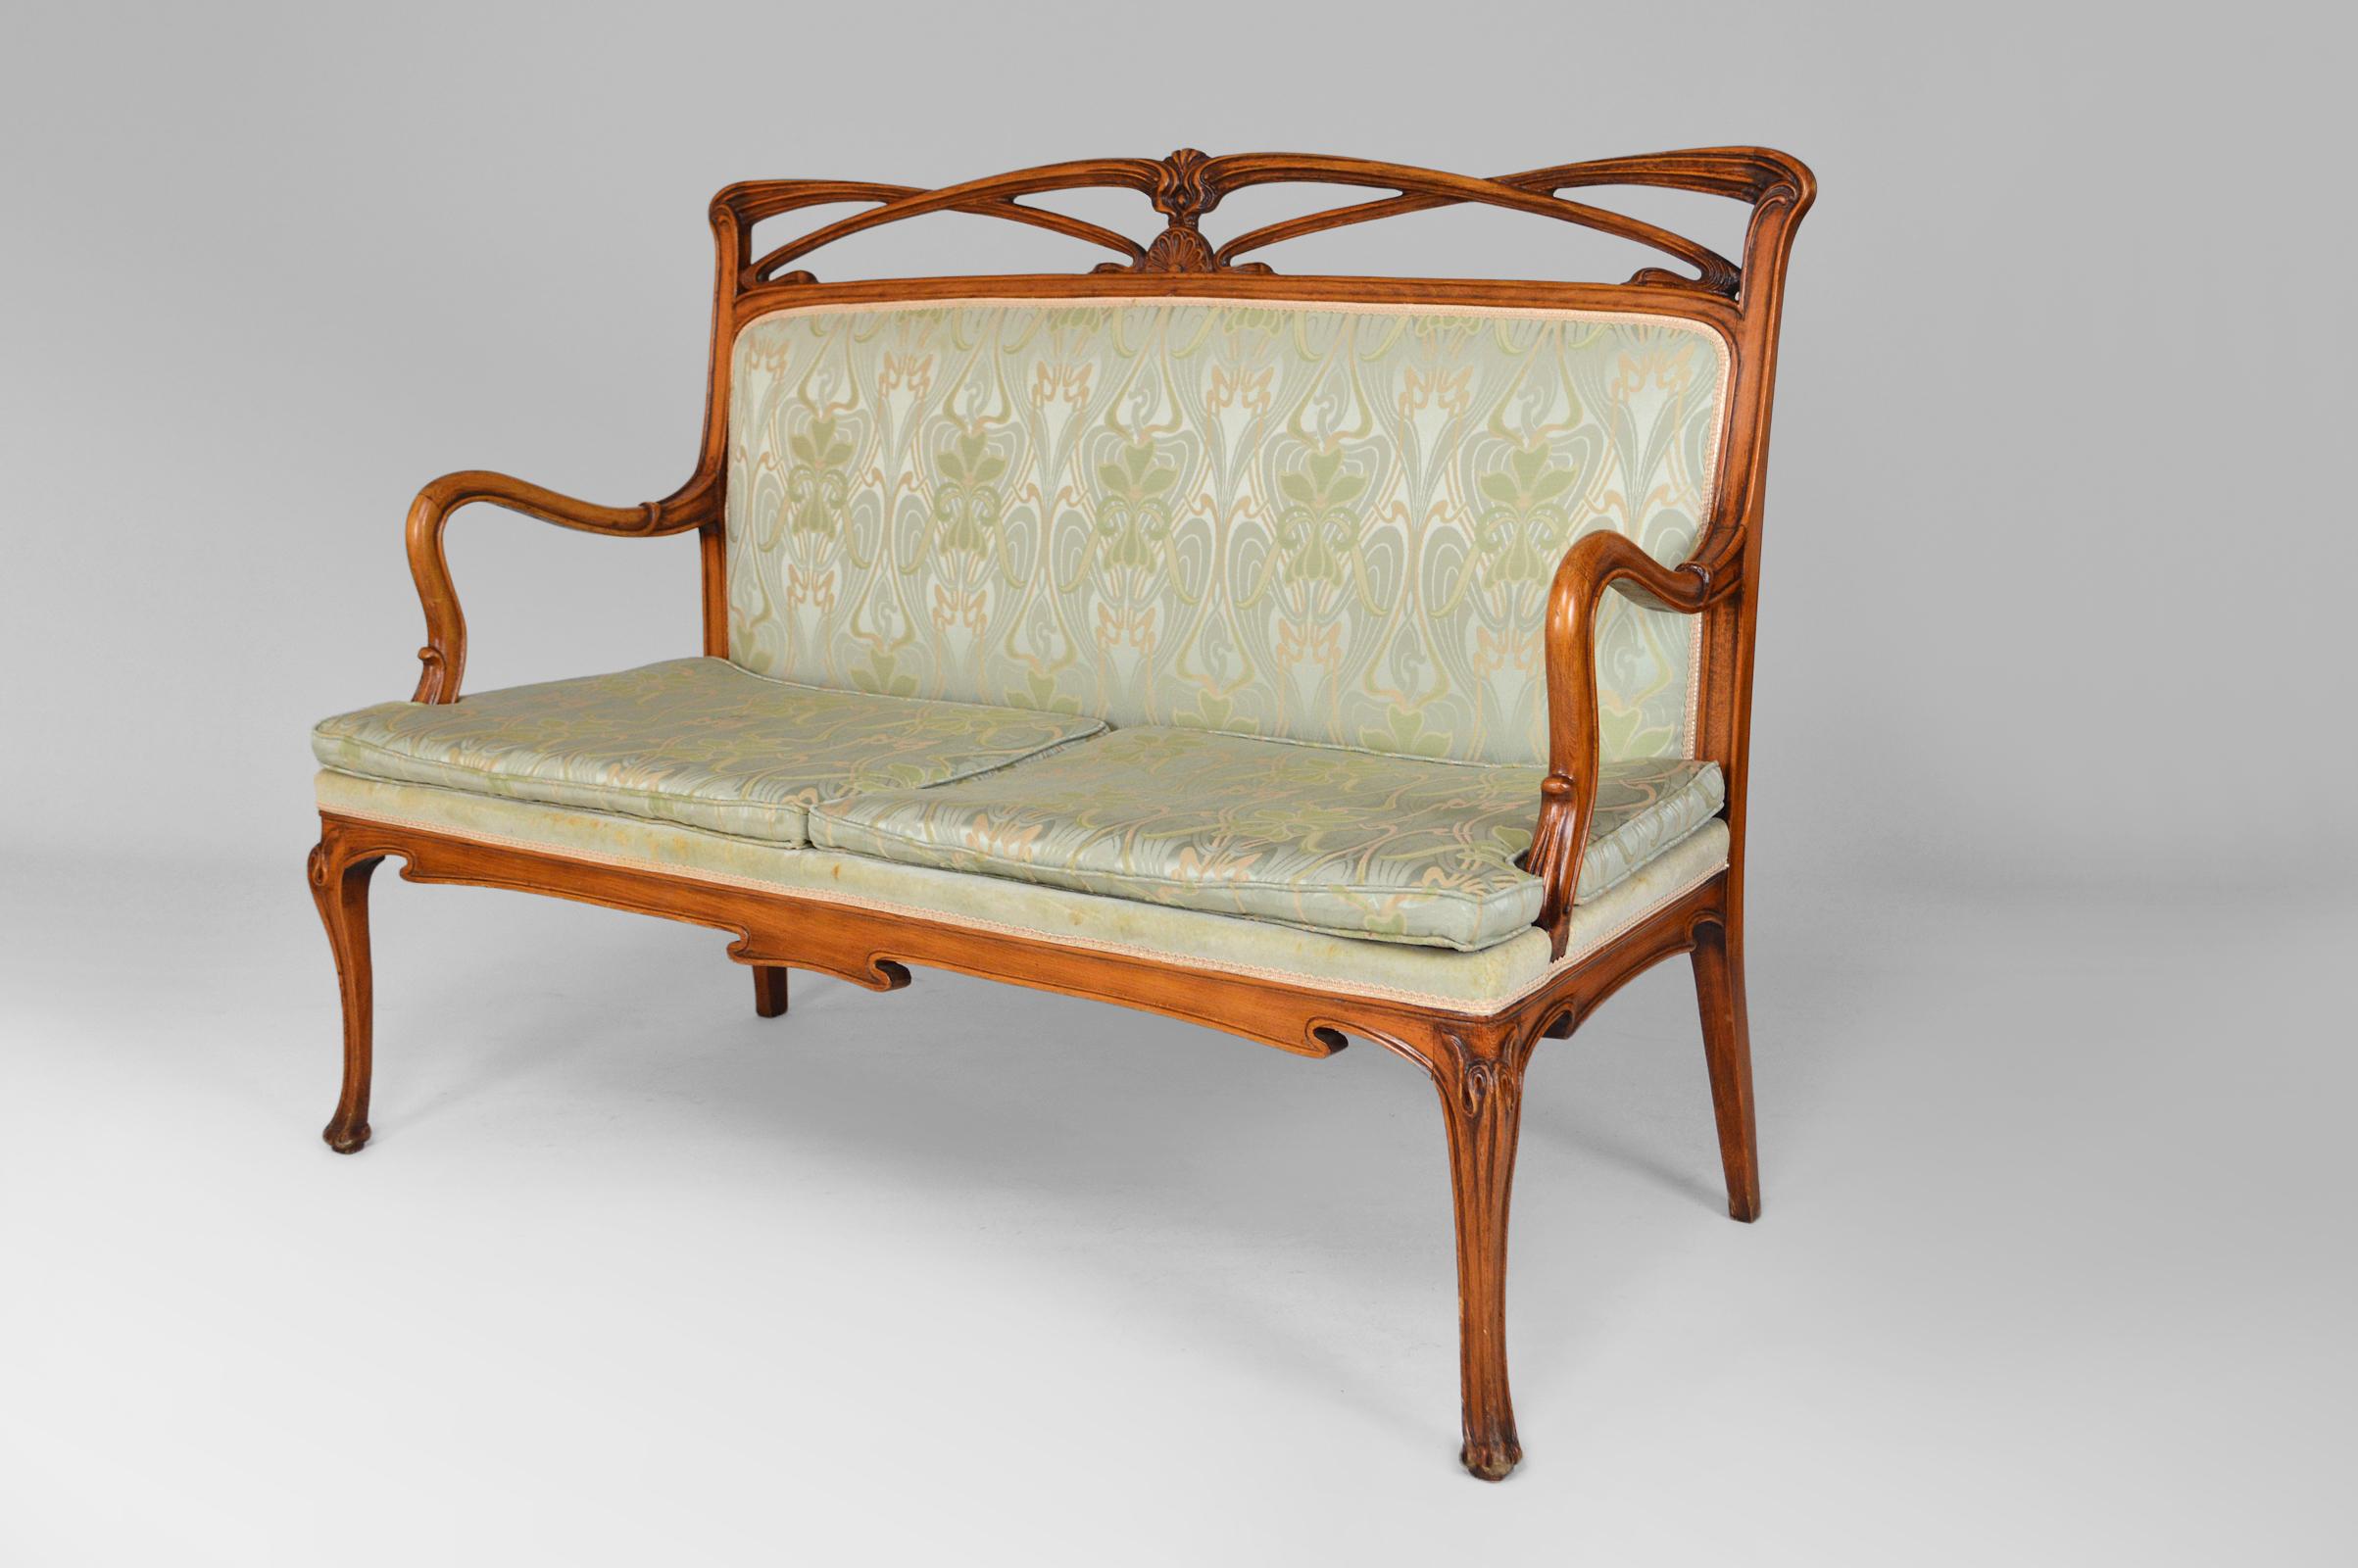 French Art Nouveau Salon Set in Carved Wood on a Floral Theme, circa 1900 For Sale